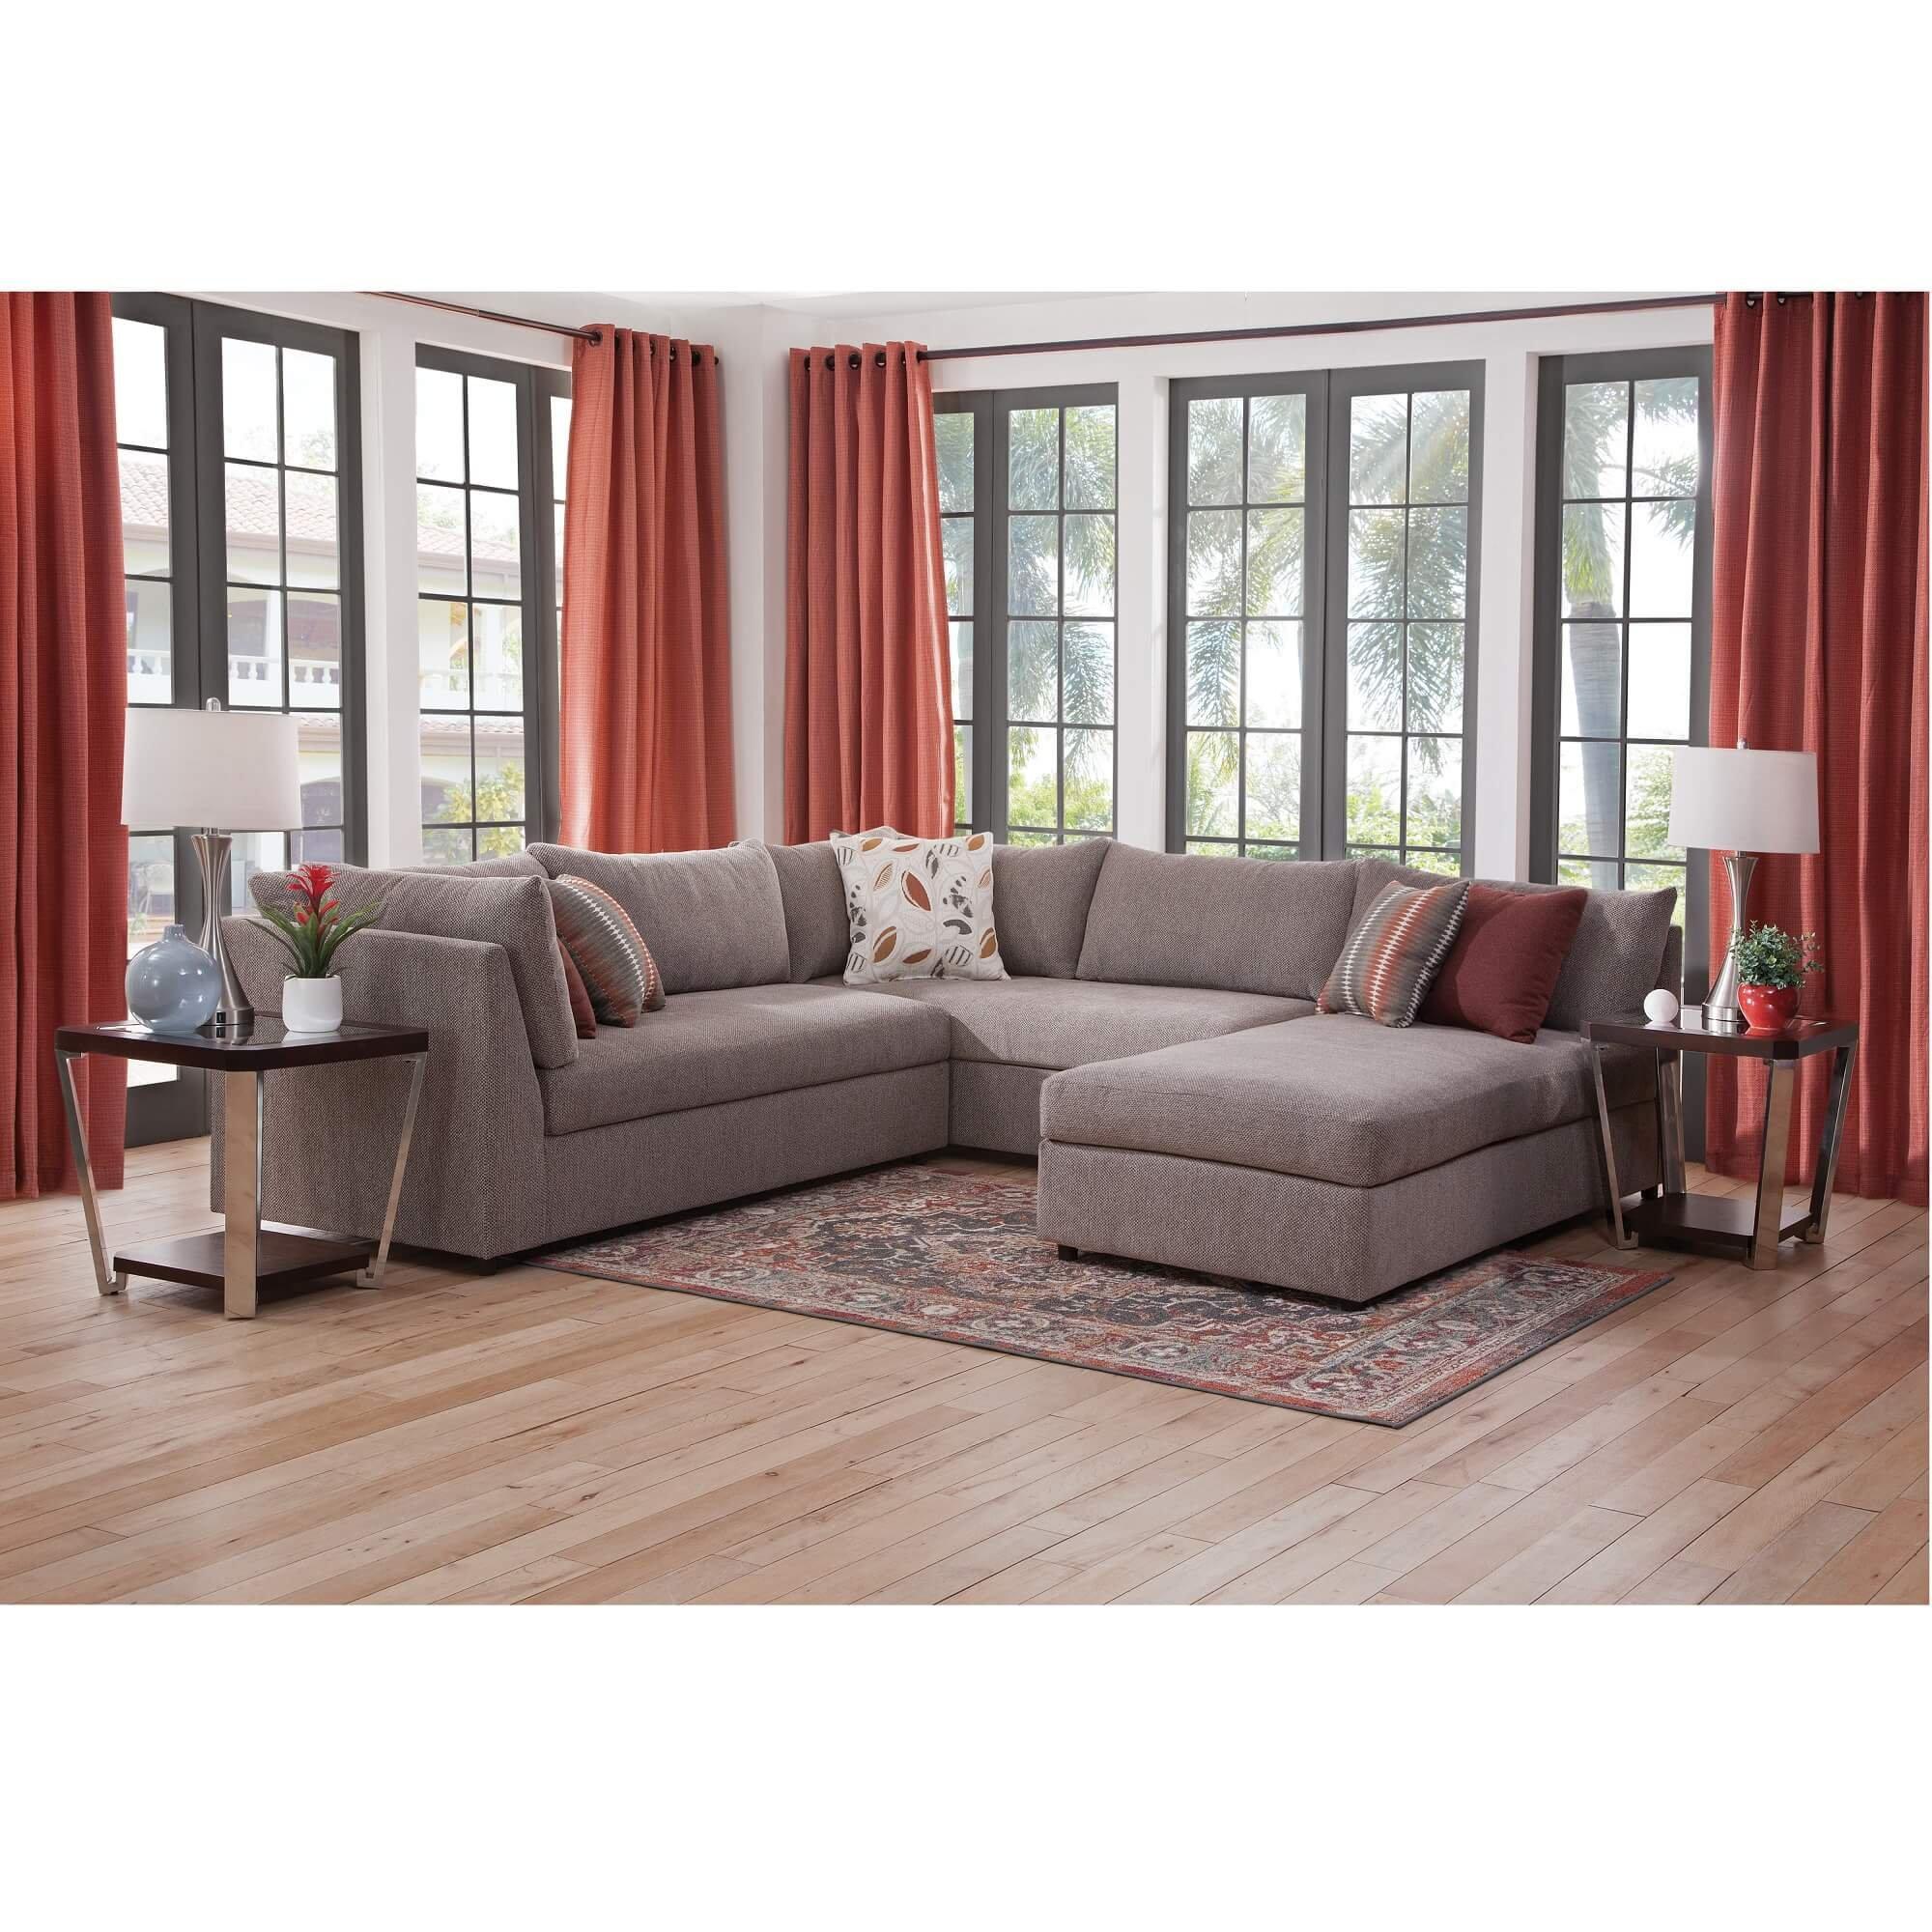 Rent to Own Woodhaven 7Piece Puzzle Chaise Sectional Sofa